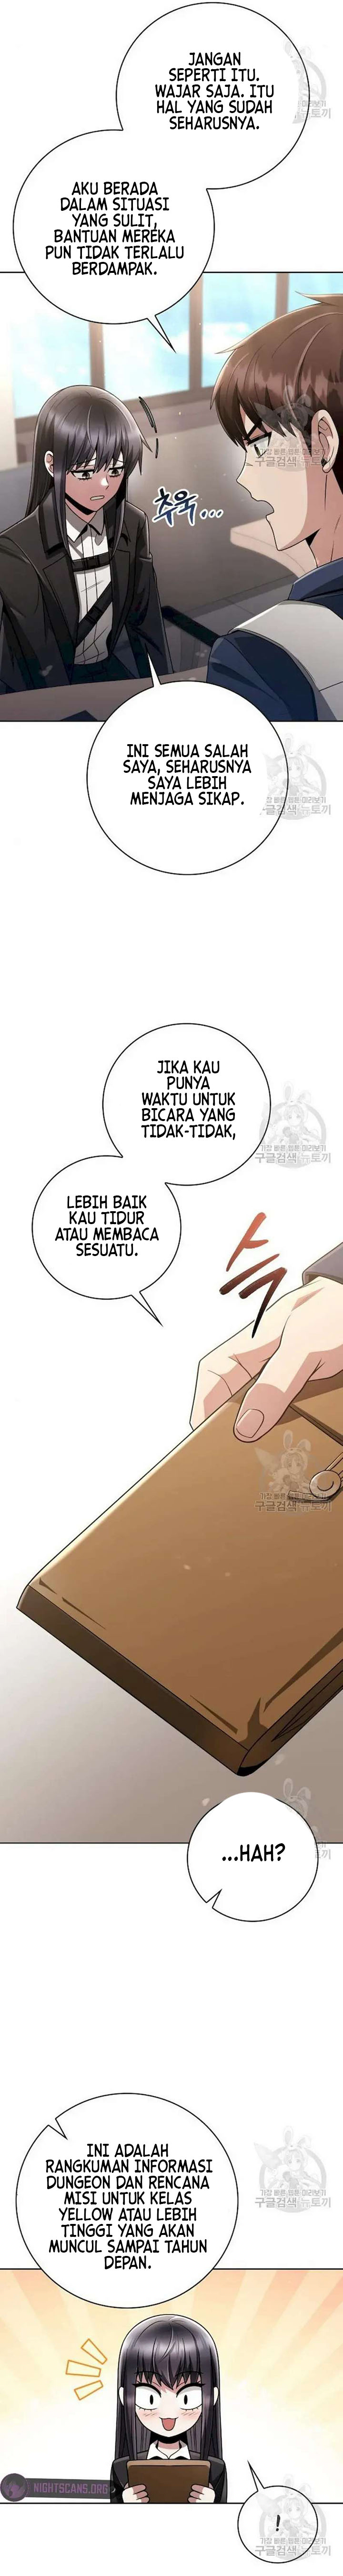 Dilarang COPAS - situs resmi www.mangacanblog.com - Komik clever cleaning life of the returned genius hunter 041 - chapter 41 42 Indonesia clever cleaning life of the returned genius hunter 041 - chapter 41 Terbaru 18|Baca Manga Komik Indonesia|Mangacan